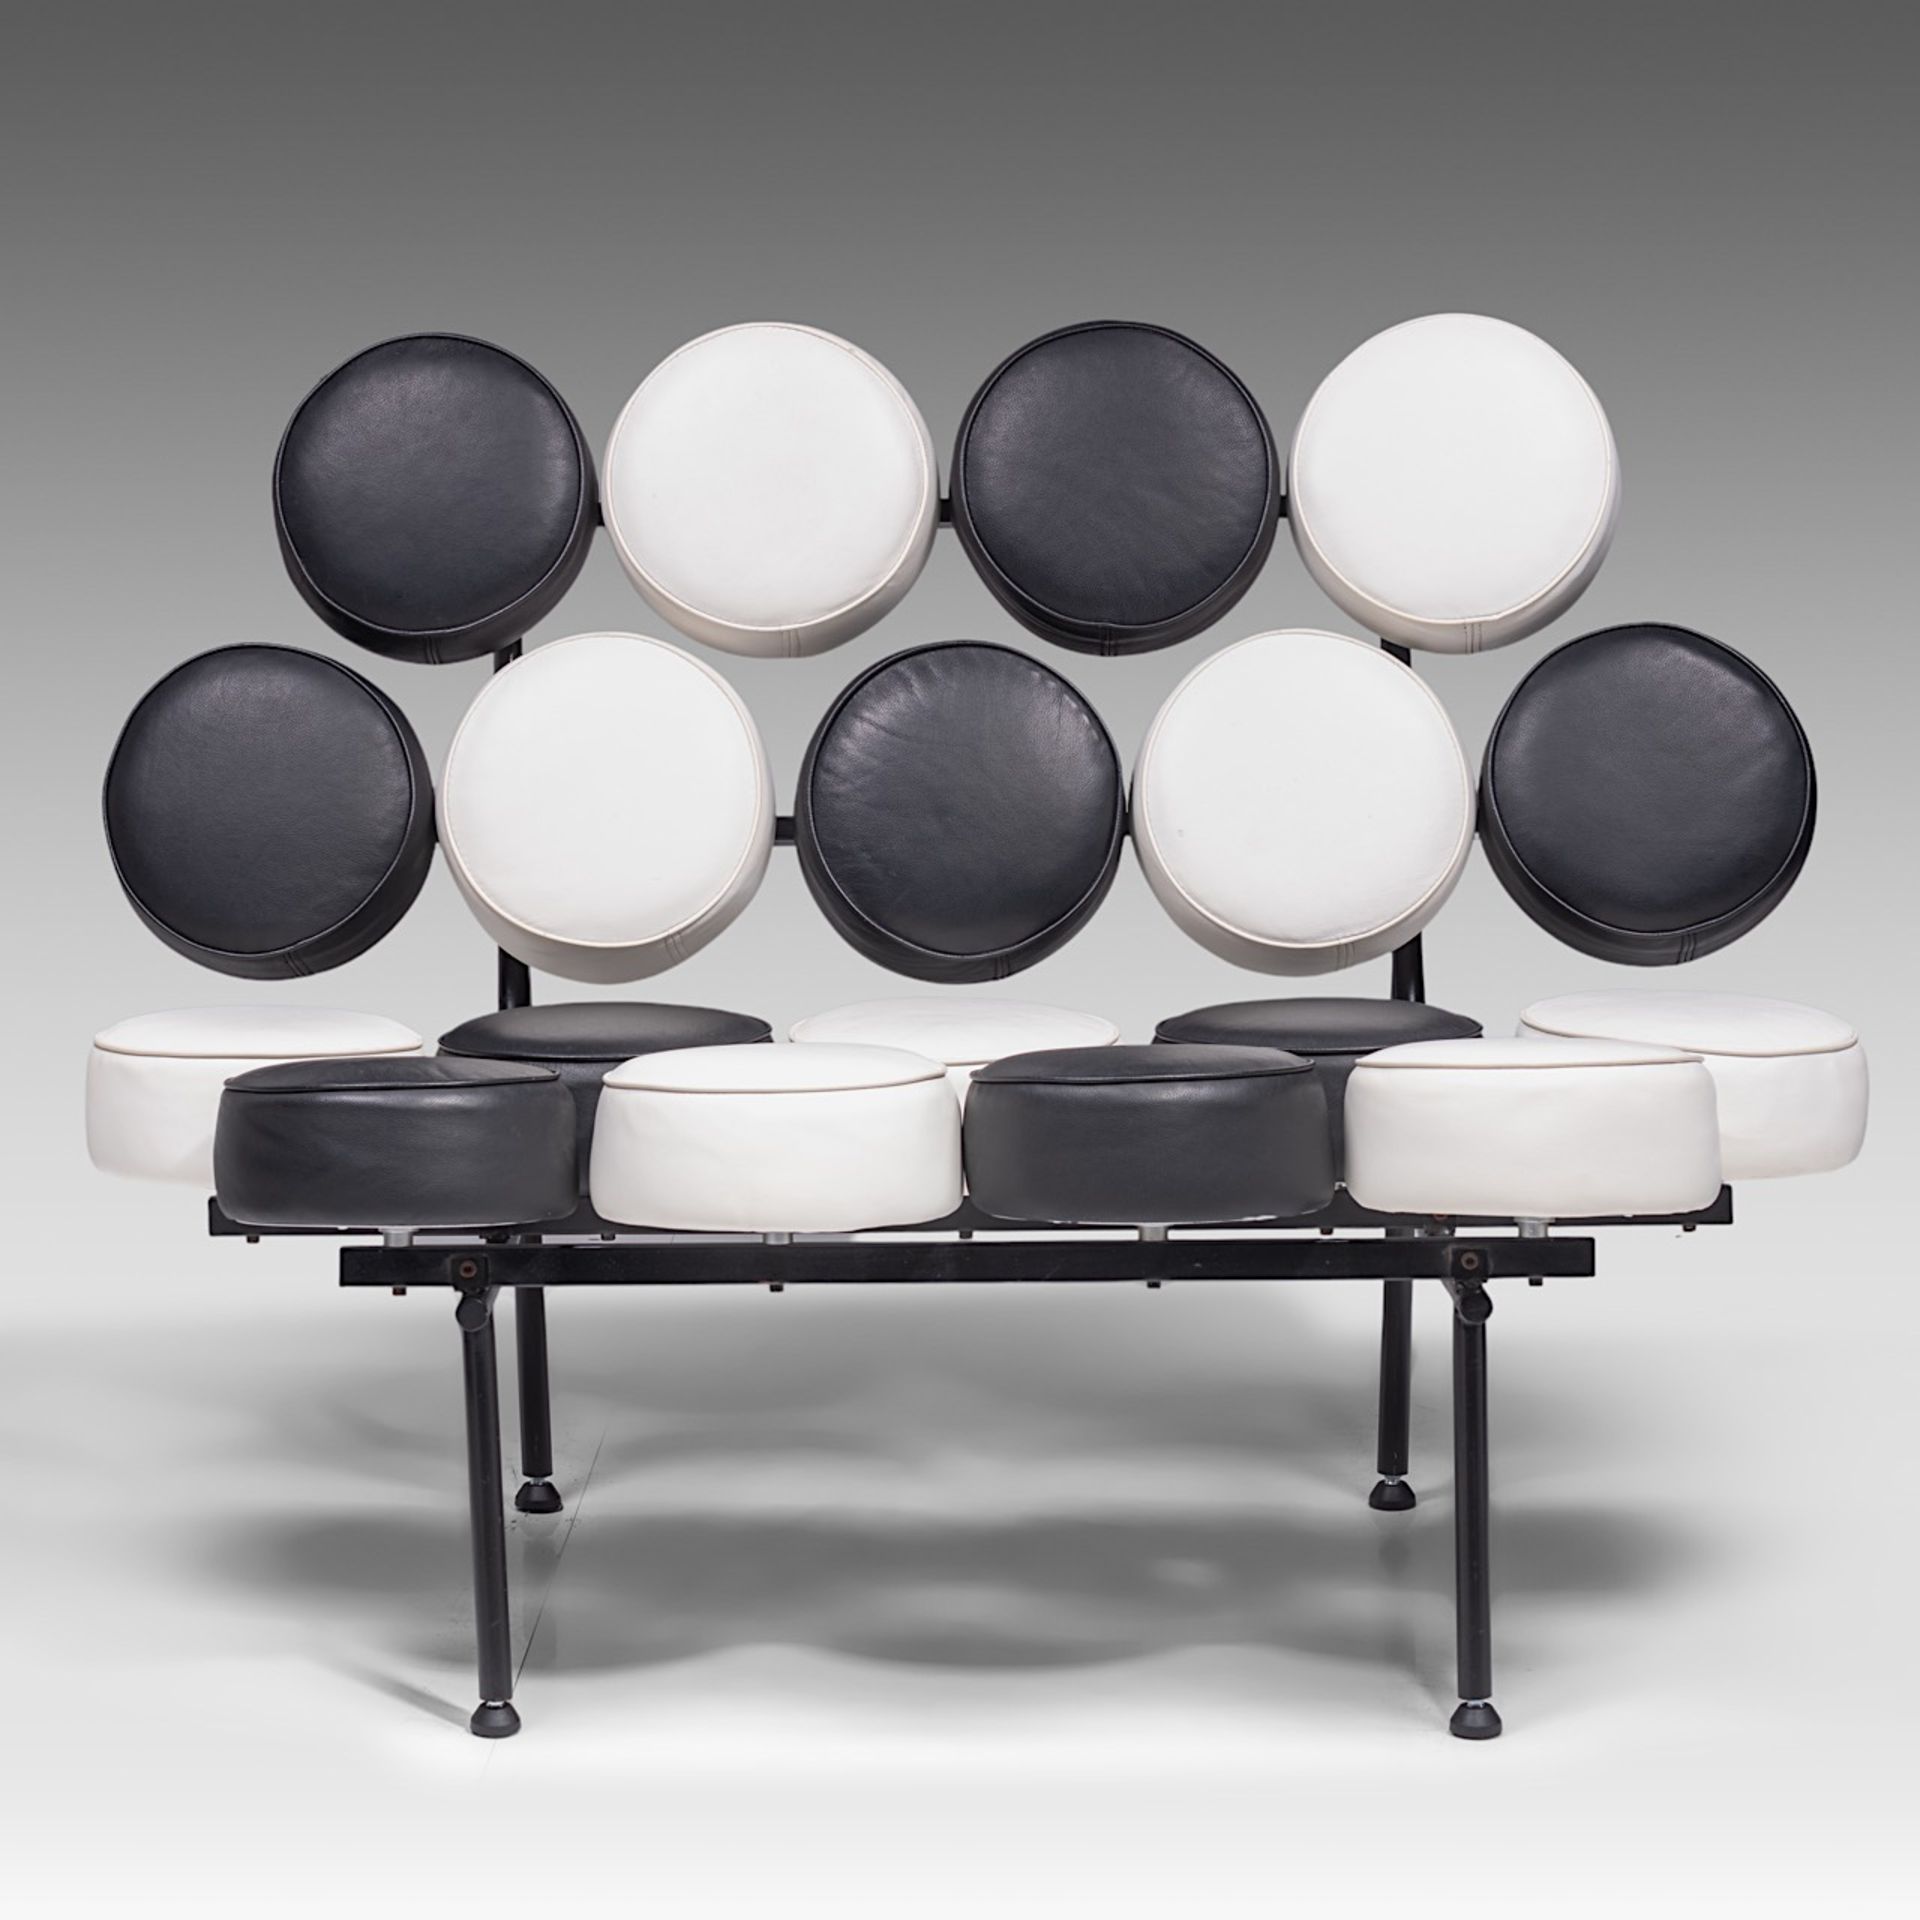 A 'Nelson Marshmallow' Seat, by Irving Harper (1956), H 98 - W 135 cm - Image 2 of 6